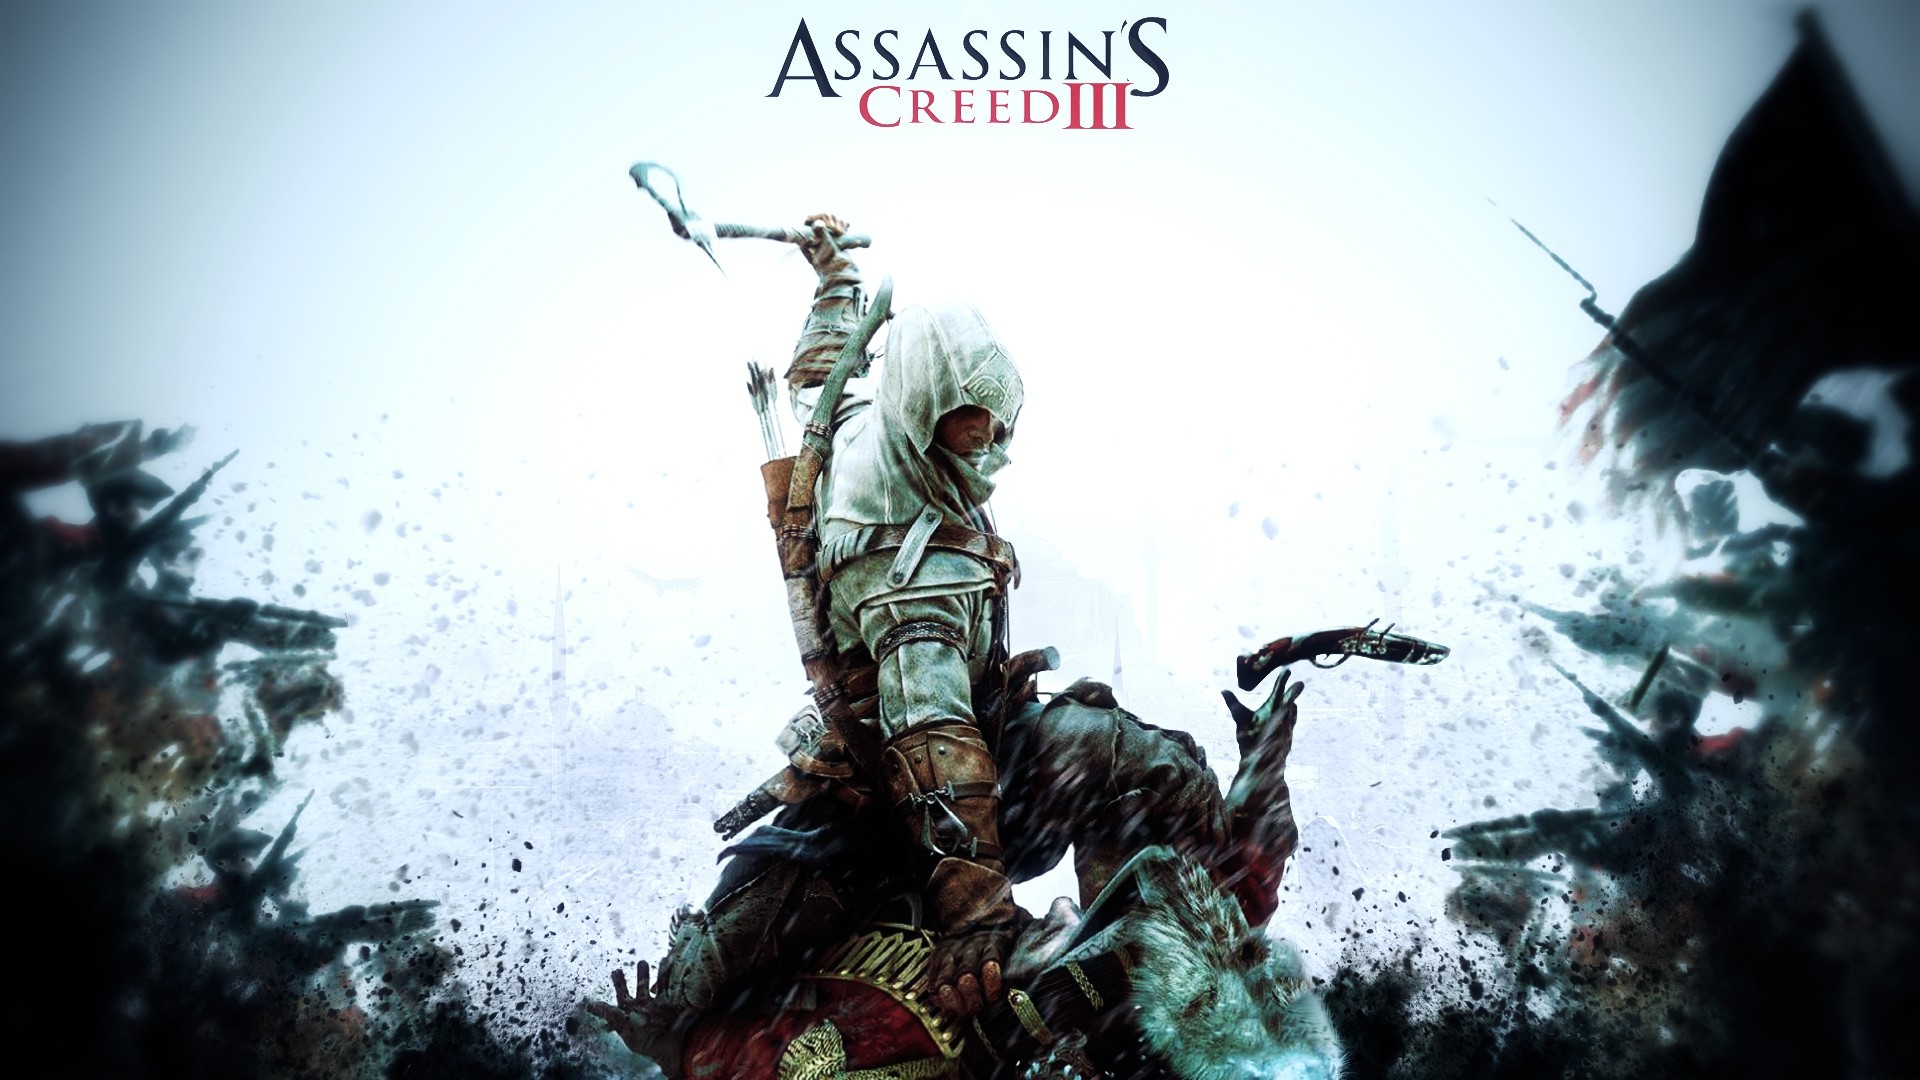 General 1920x1080 Assassin's Creed III Connor Kenway video games video game art video game men PC gaming